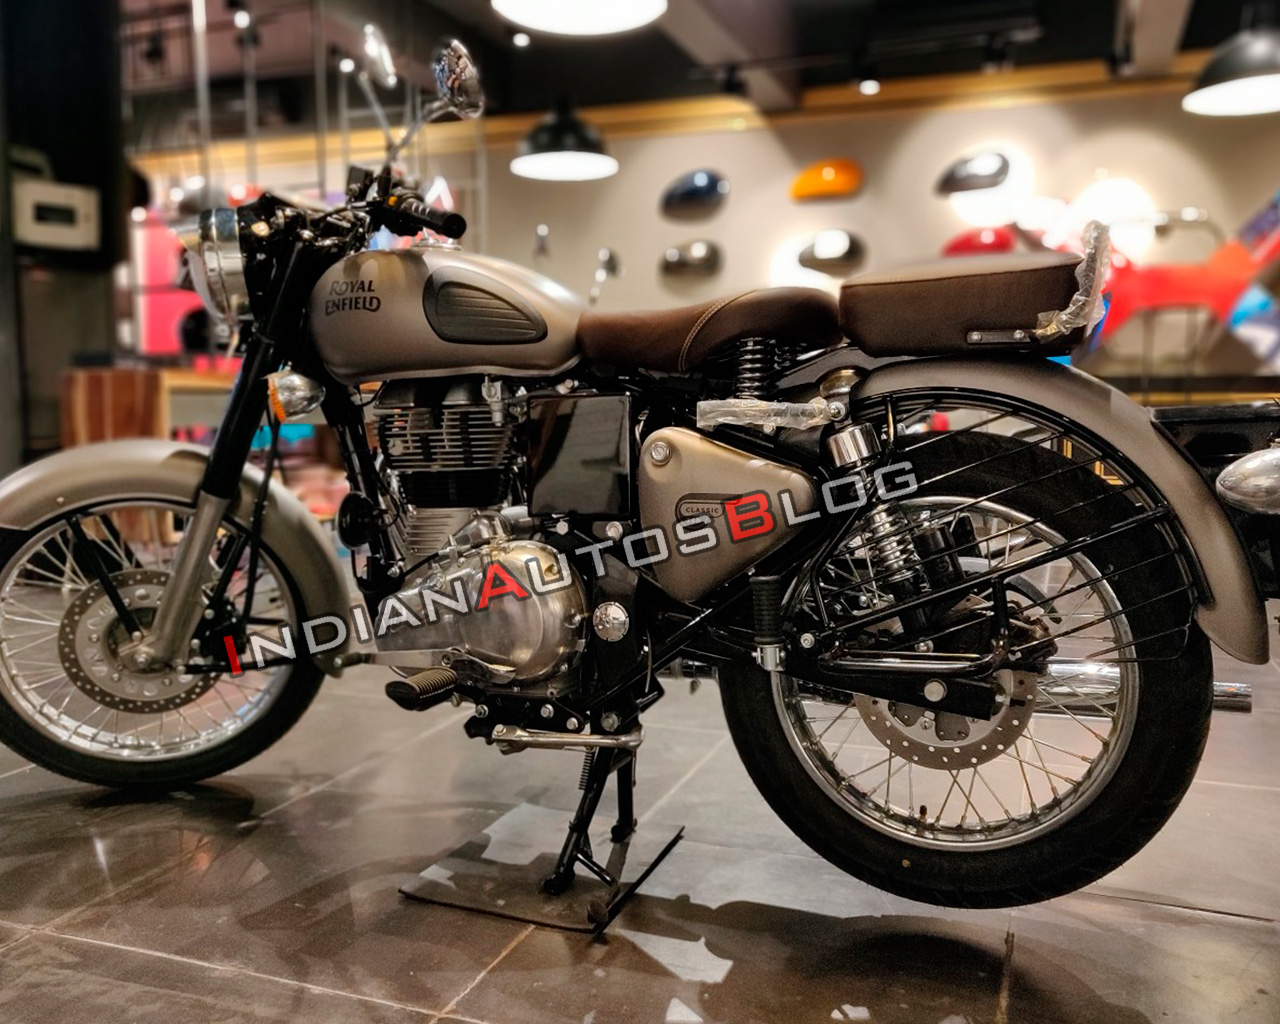 Royal Enfield Classic 350 range updated with rear disc brake